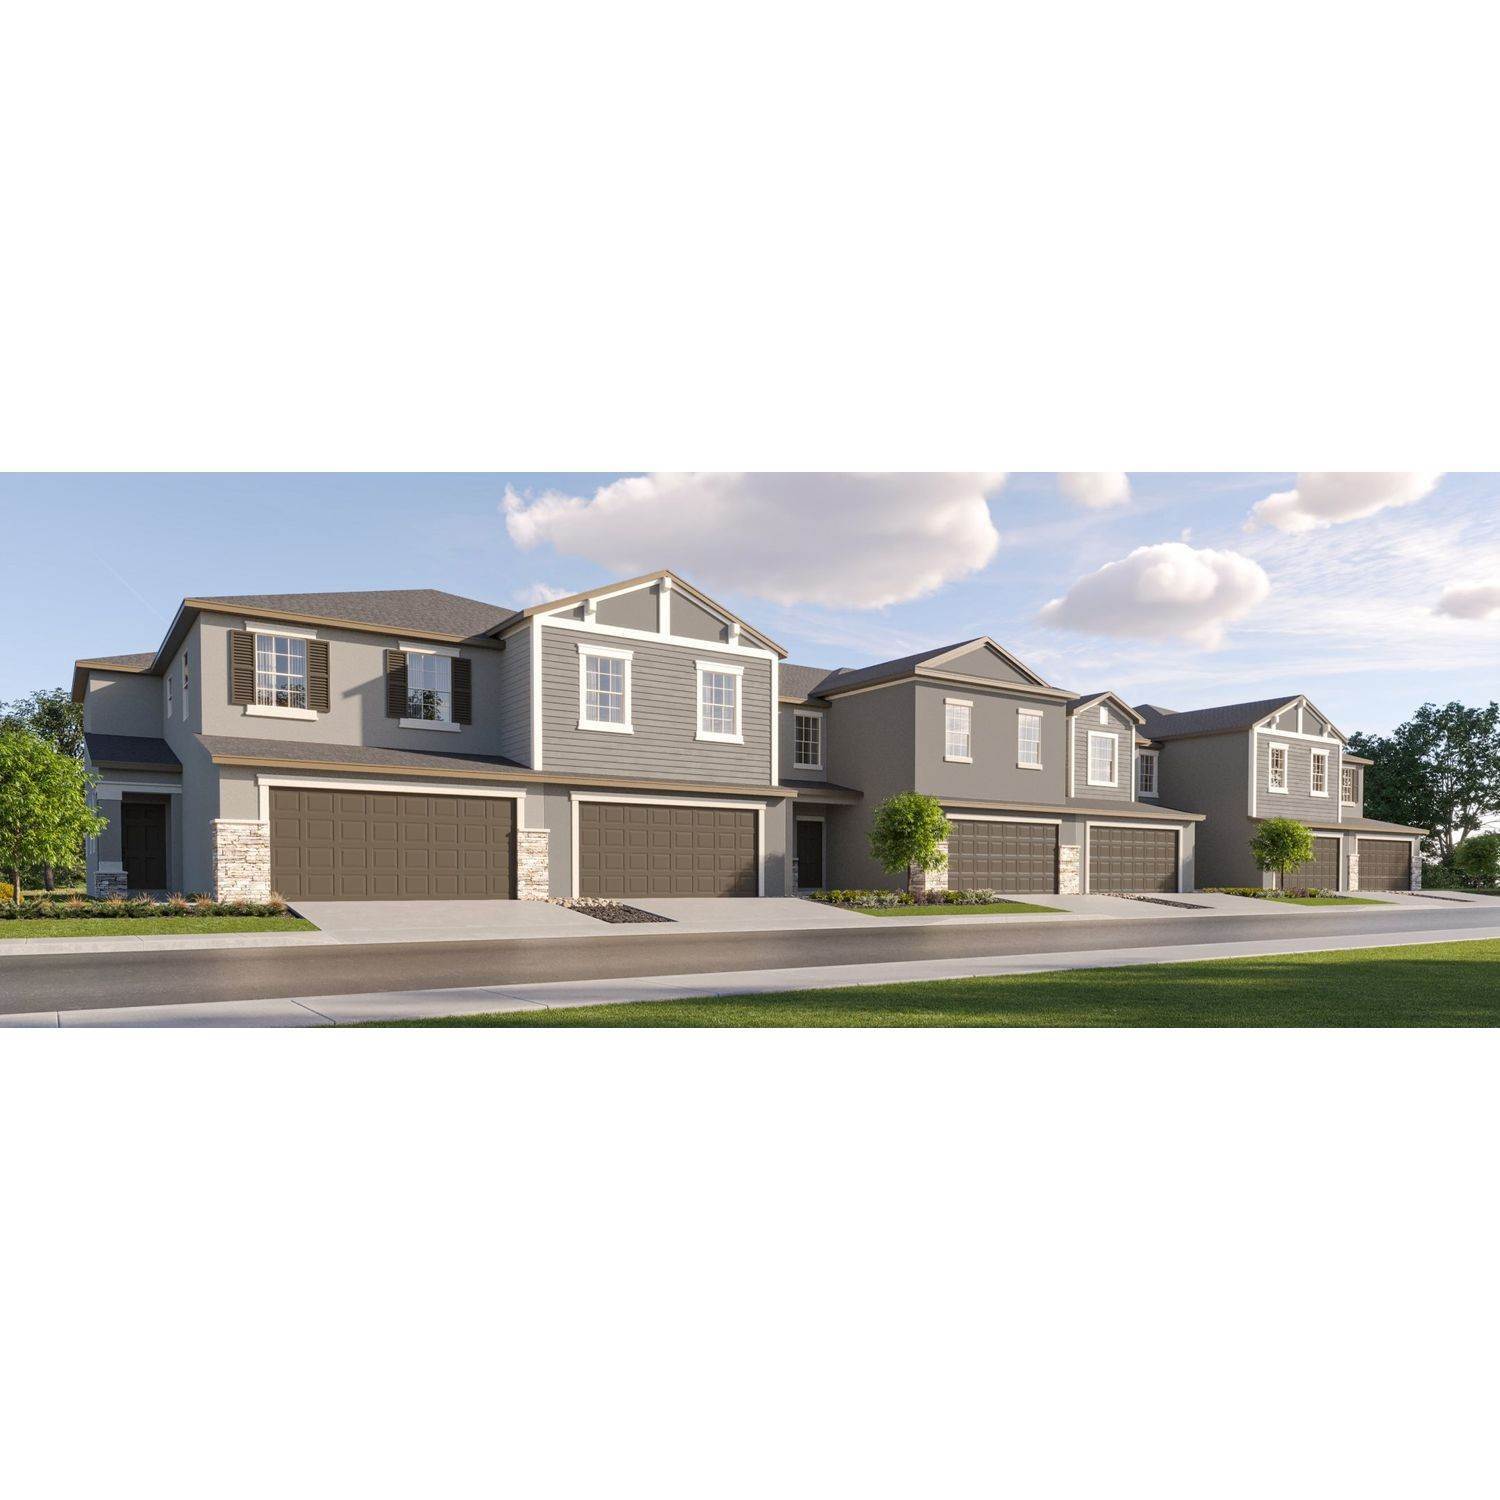 Angeline - The Townhomes building at 17516 Nectar Flume Drive, Land O' Lakes, FL 34638